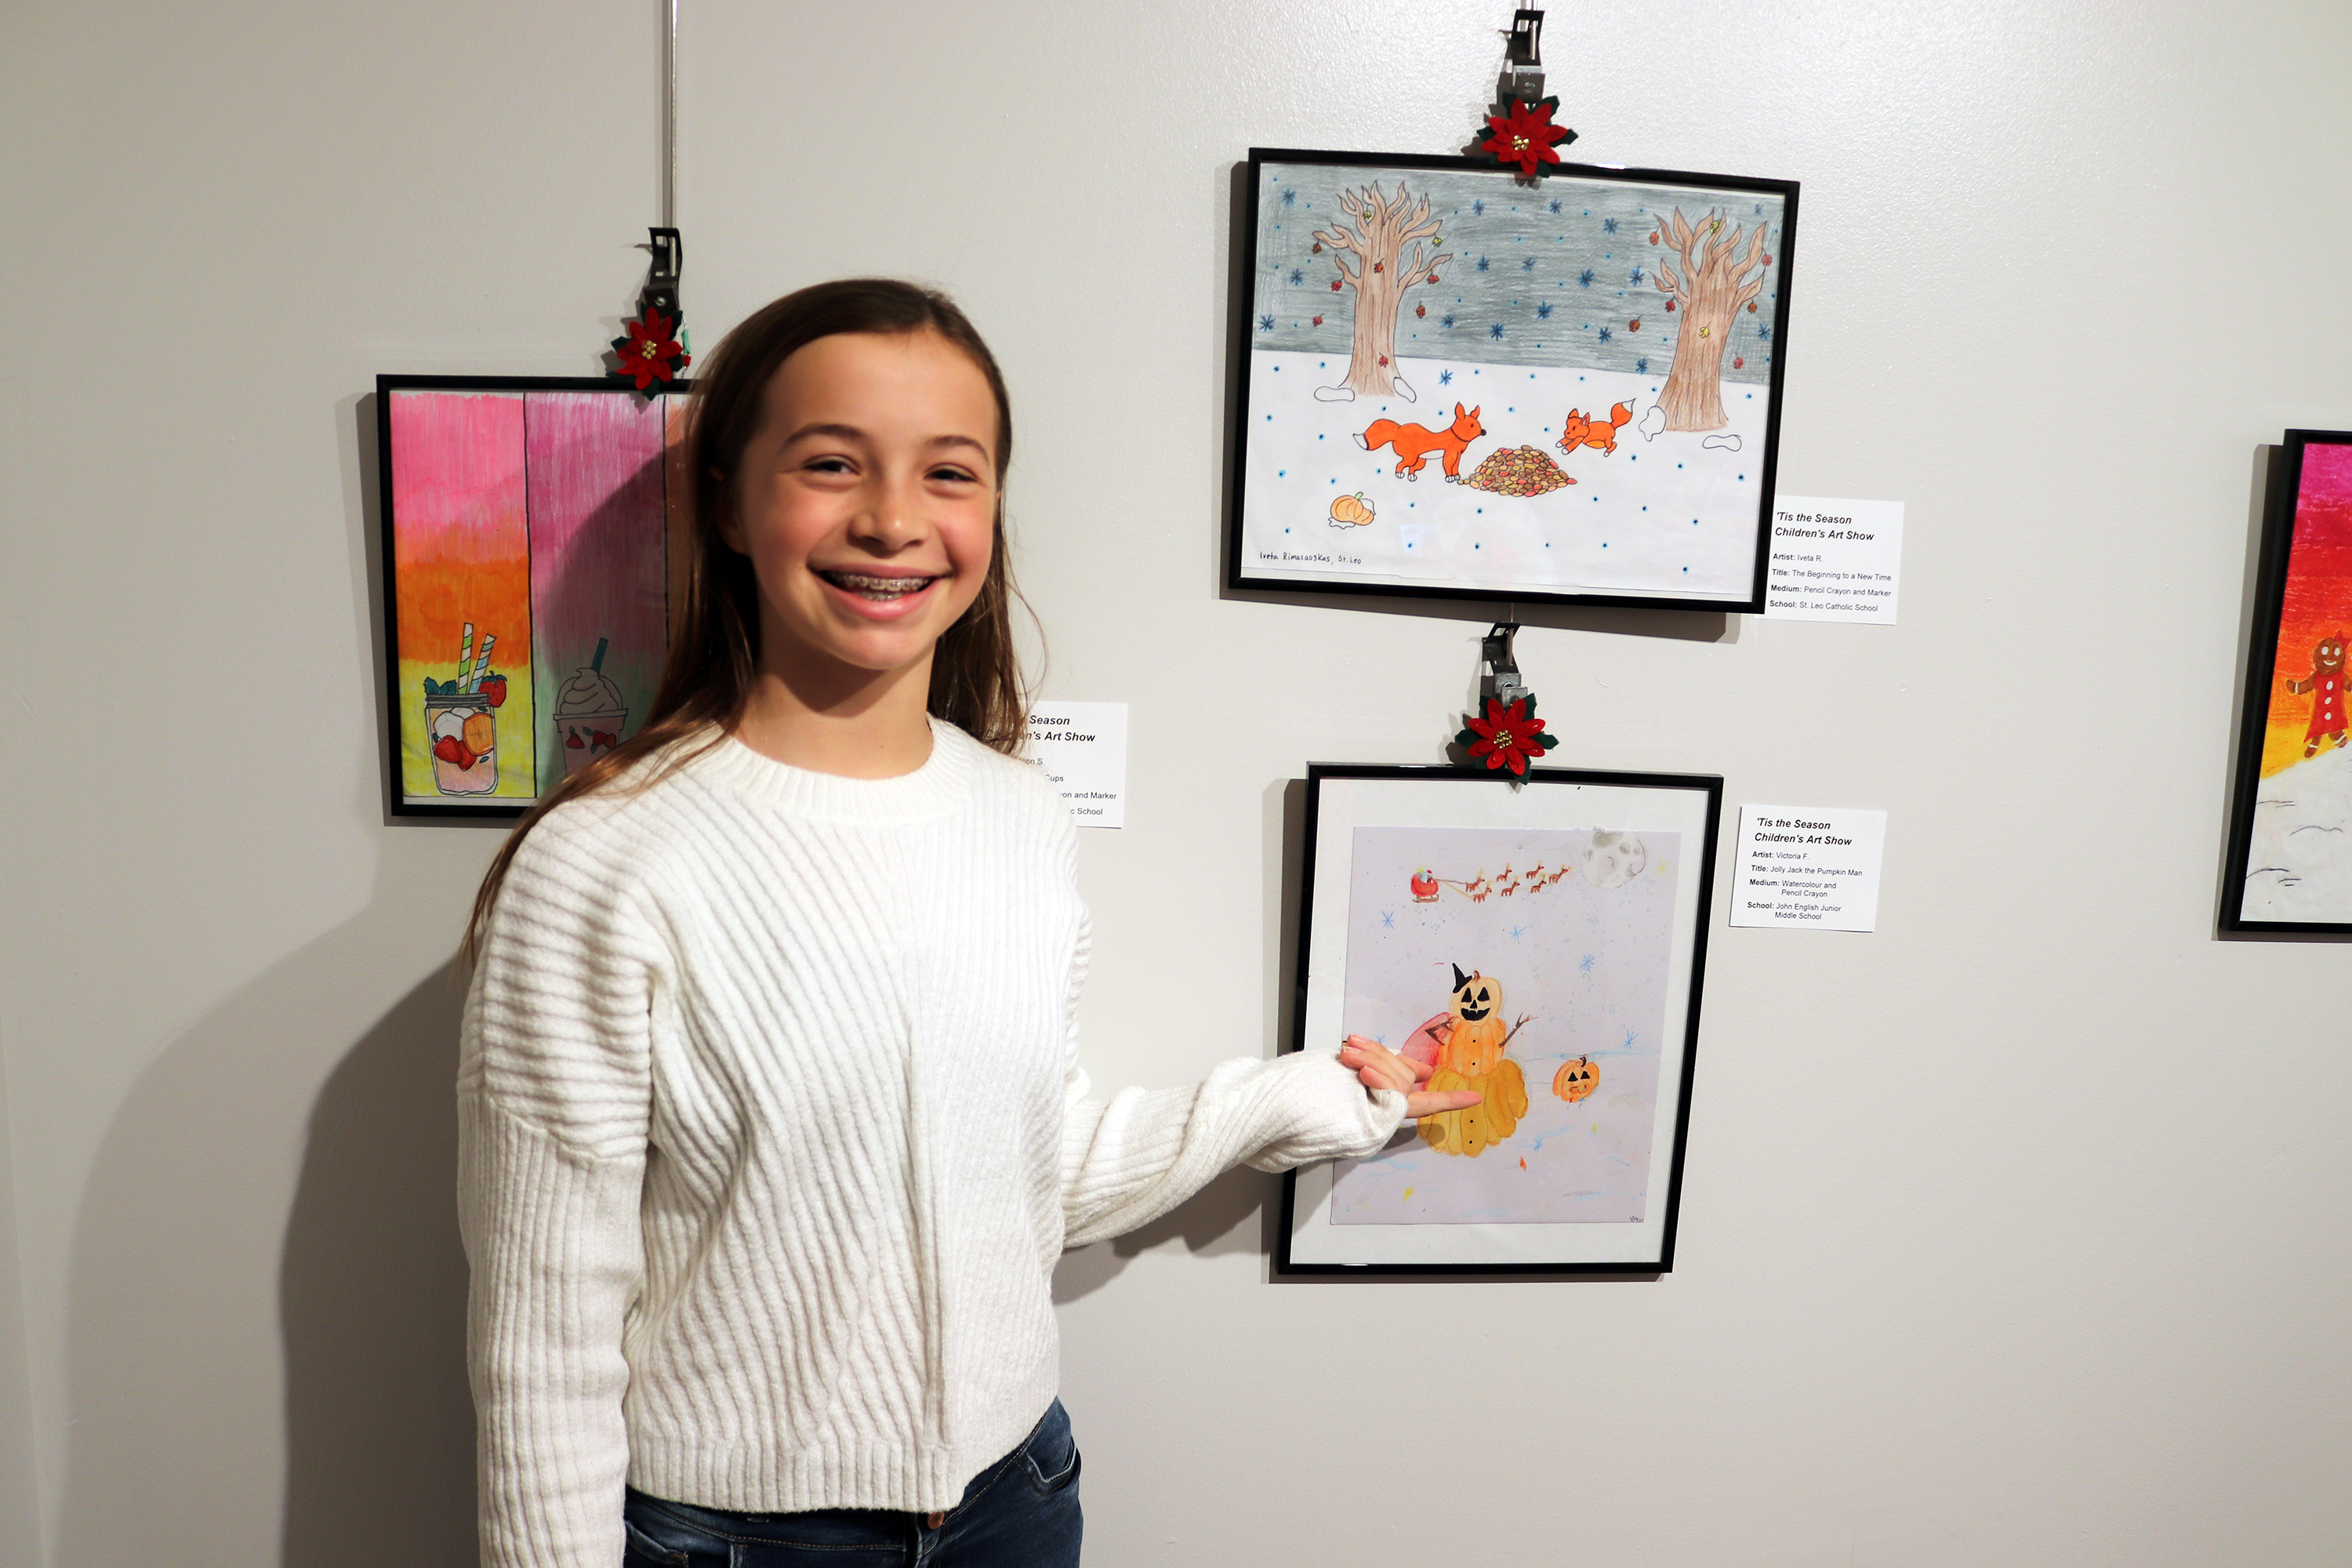 A student wearing a white sweater standing beside artwork on the walls and pointing to one of them